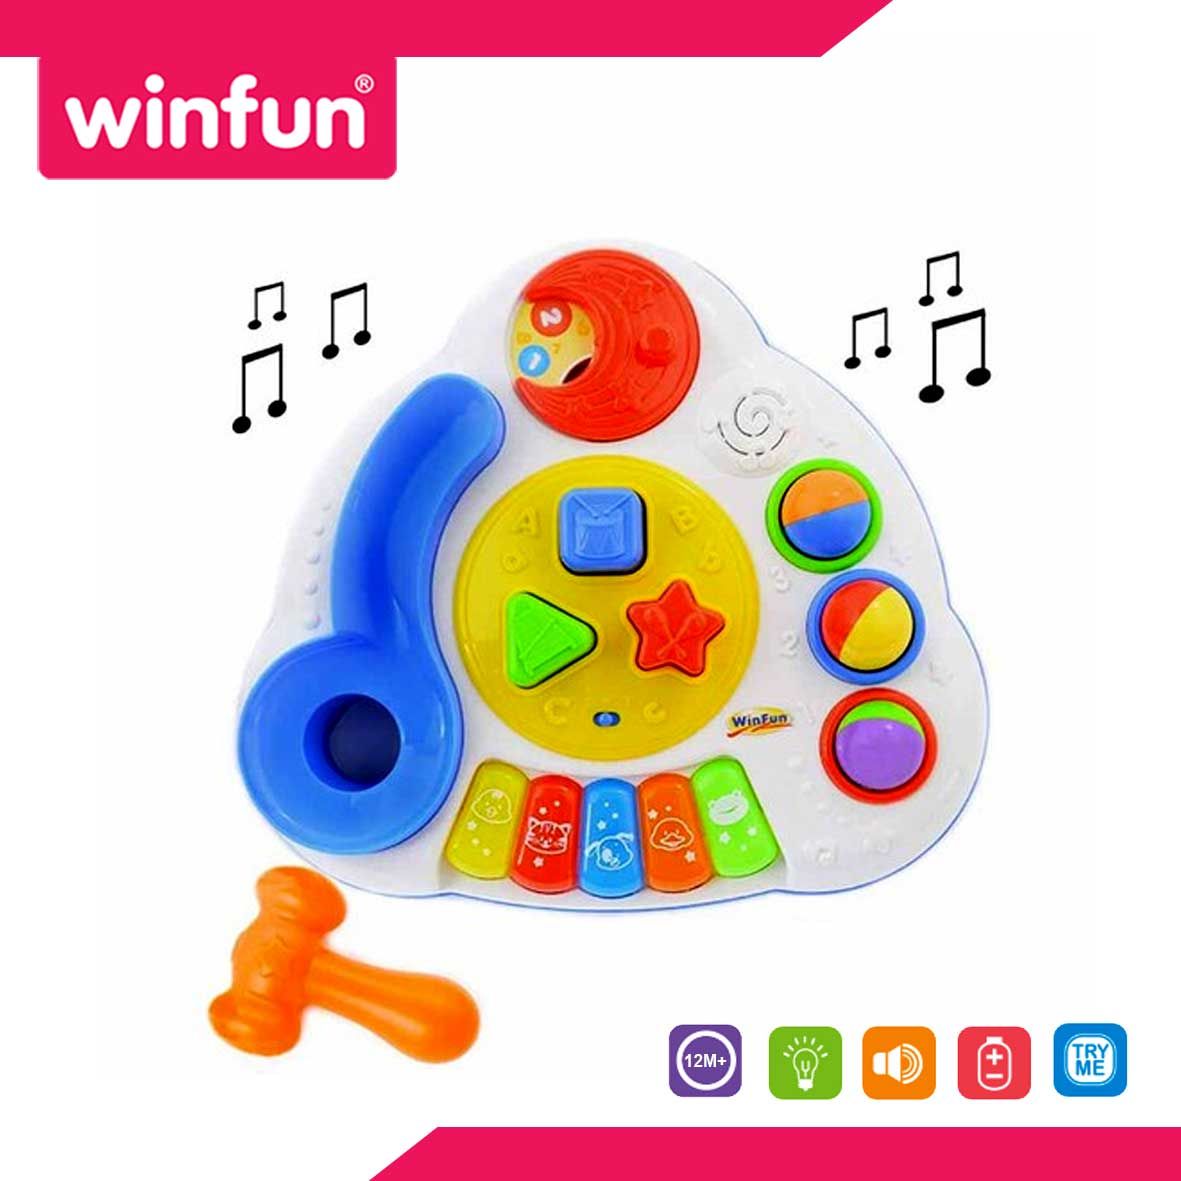 Winfun Ball 'n Shapes Musical Table - 4